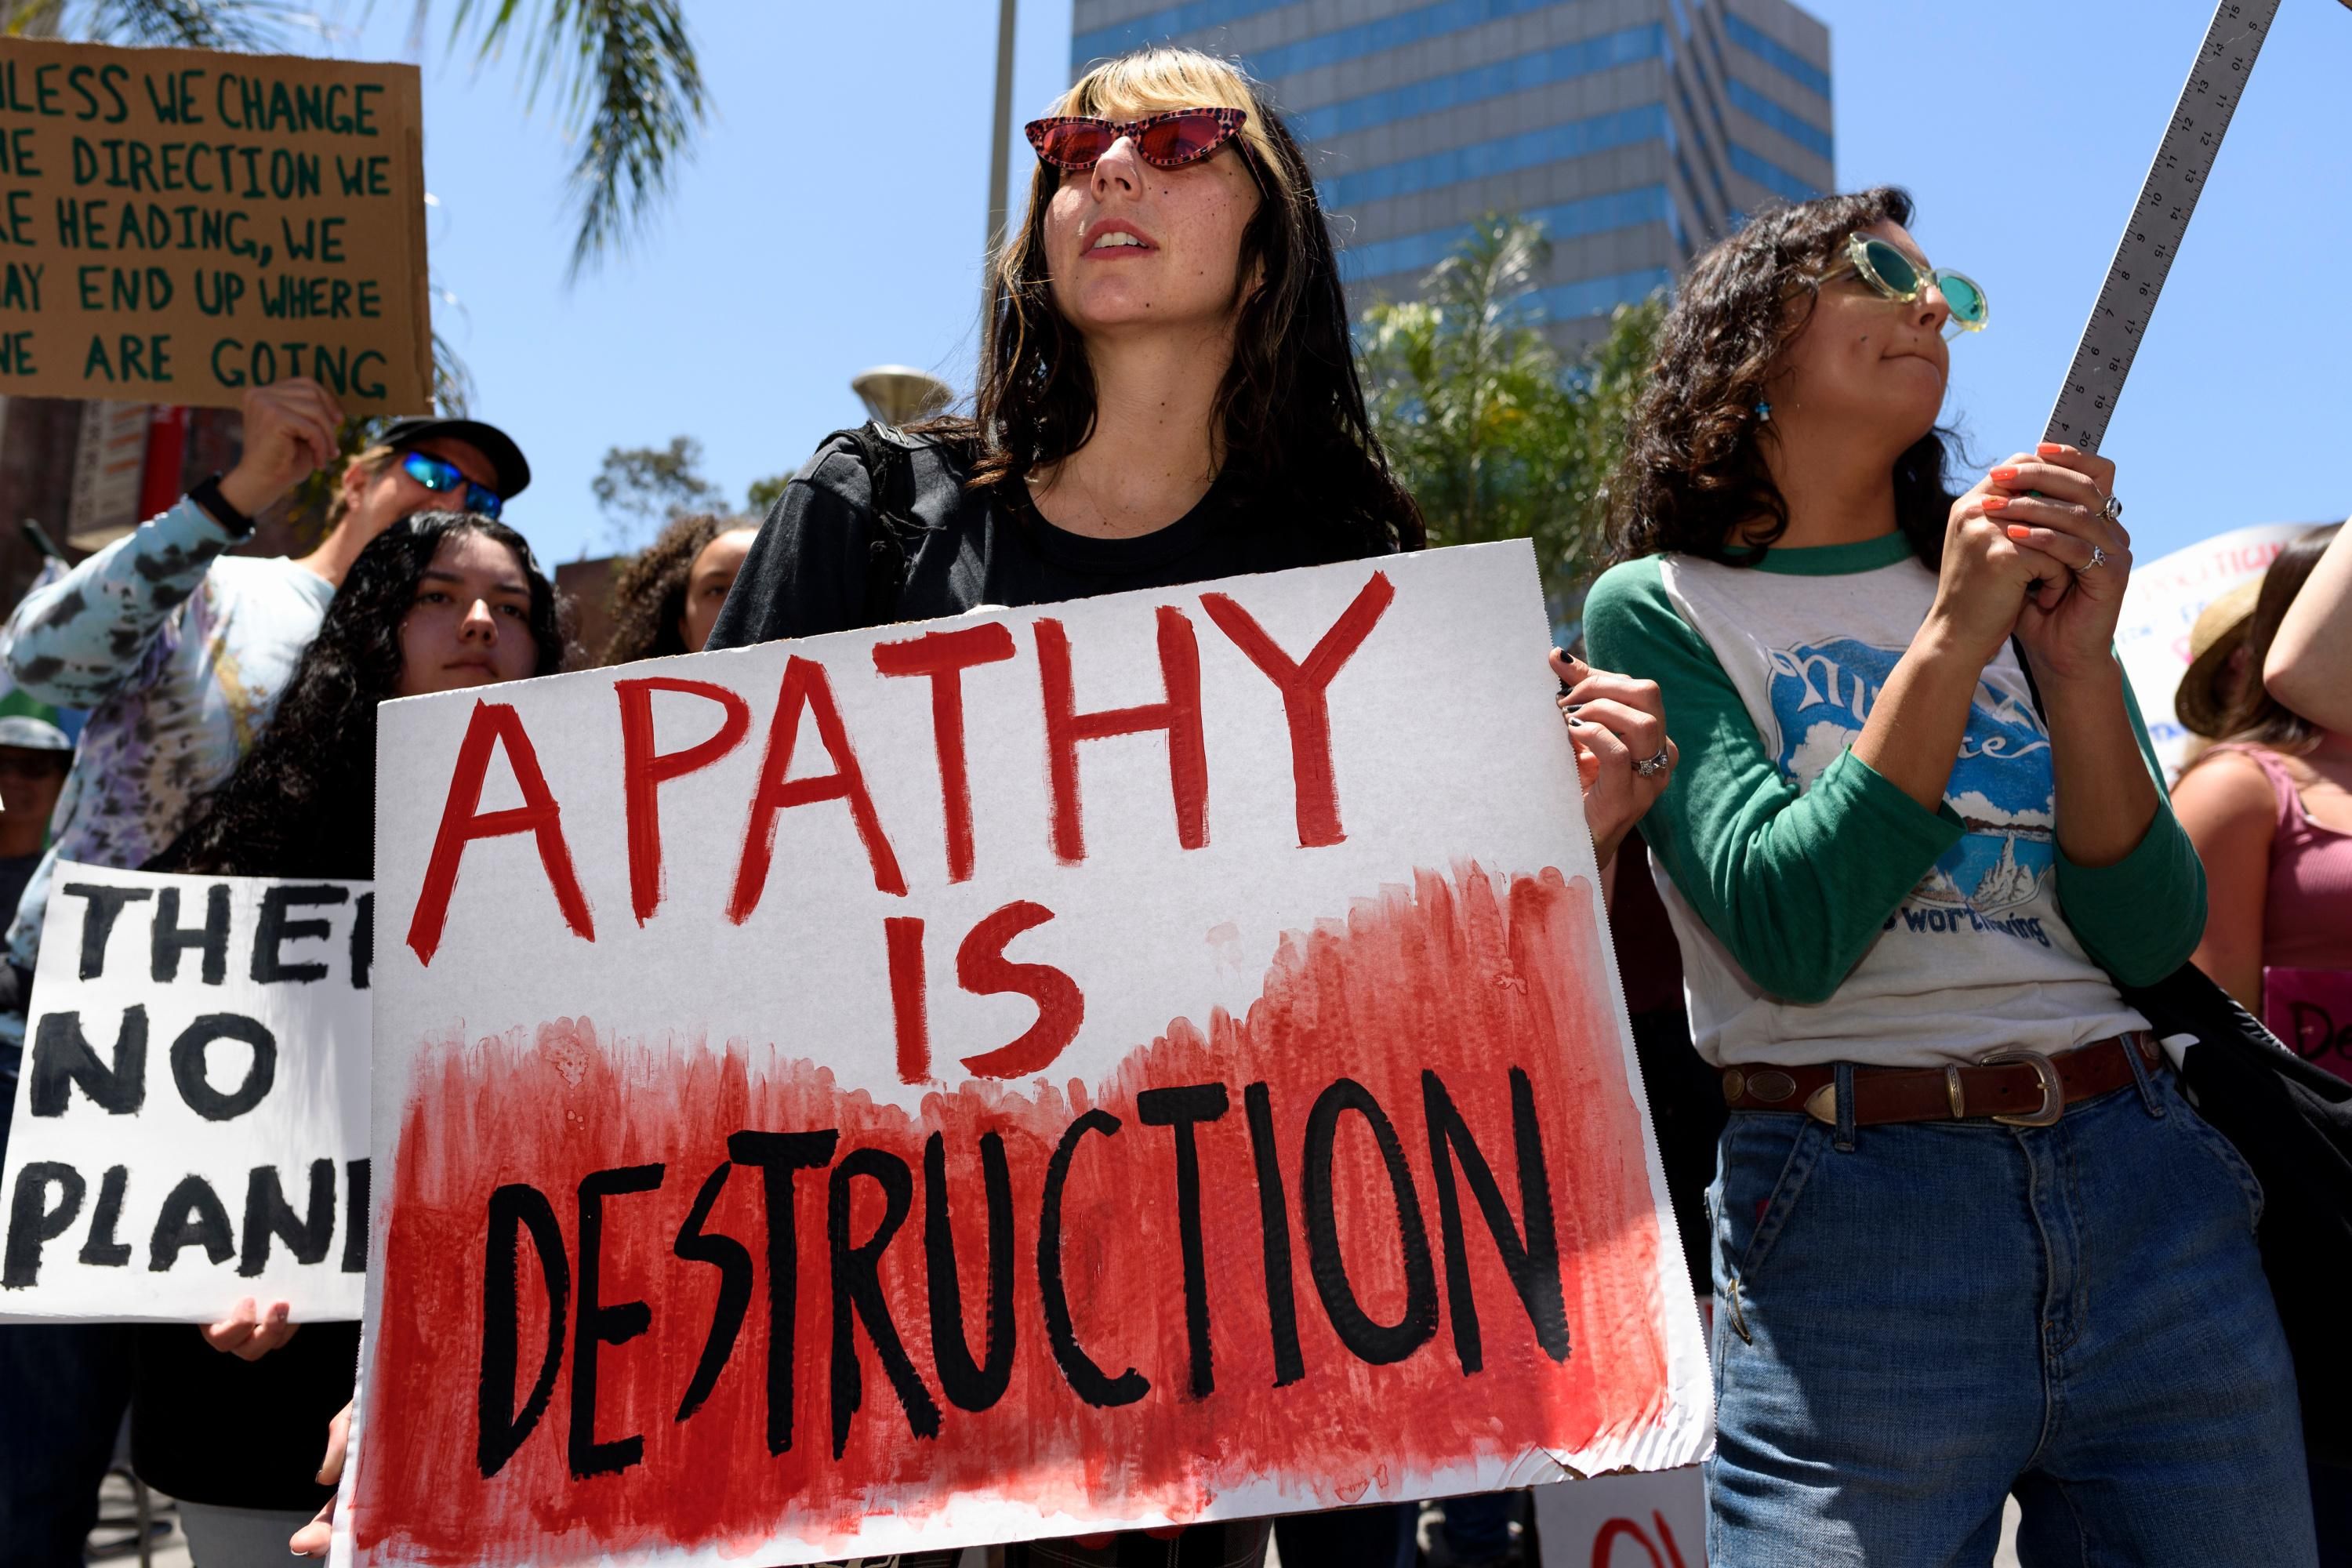 sign: apathay is destruction